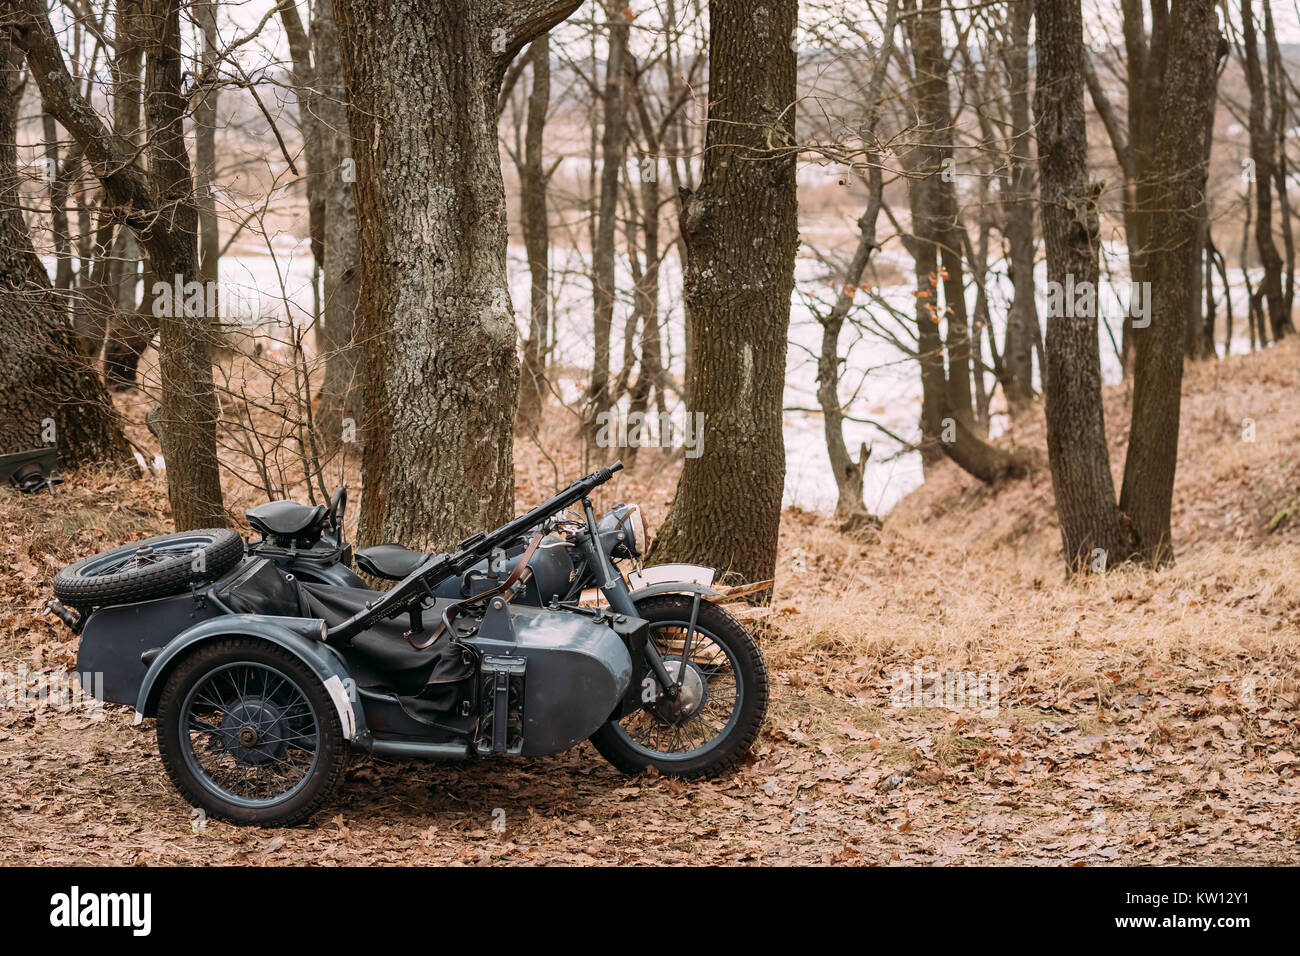 Old Tricar, Three-Wheeled Motorbike With Machine Gun On Sidecar Of Wehrmacht, Armed Forces Of Germany Of World War II Time In Autumn Forest. Stock Photo